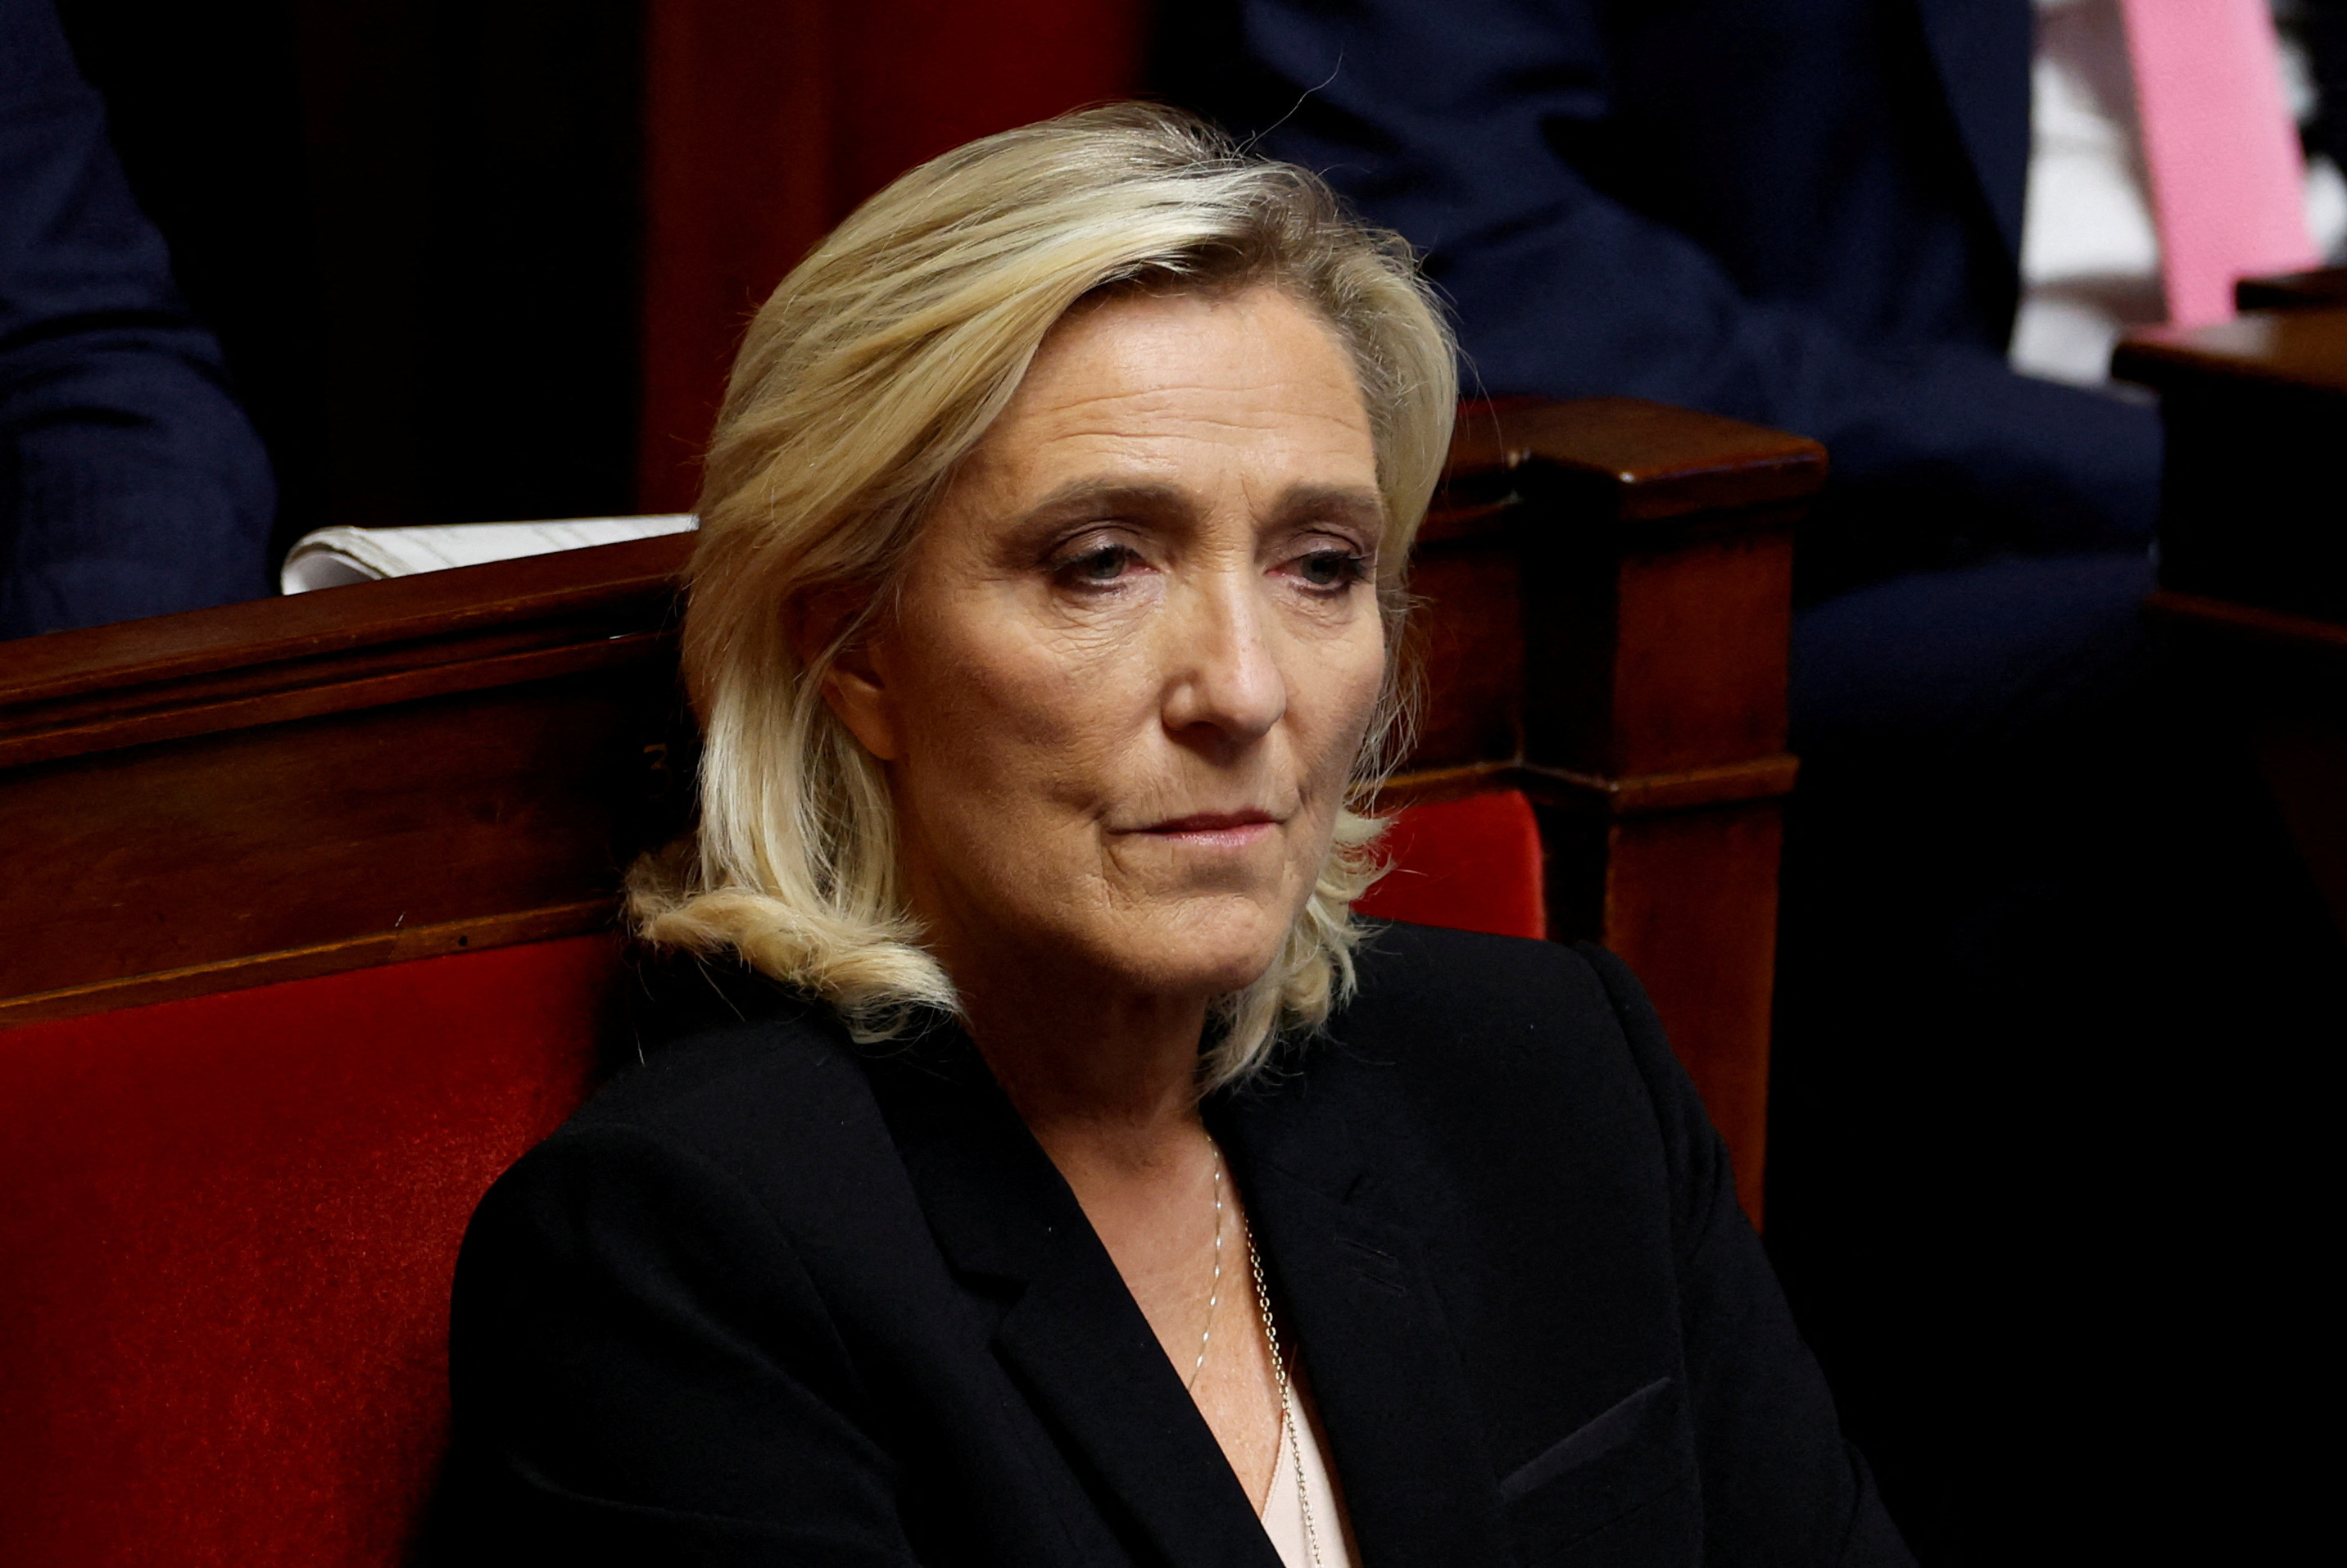 Headscarf ban dogs Le Pen's bid for the French presidency – POLITICO